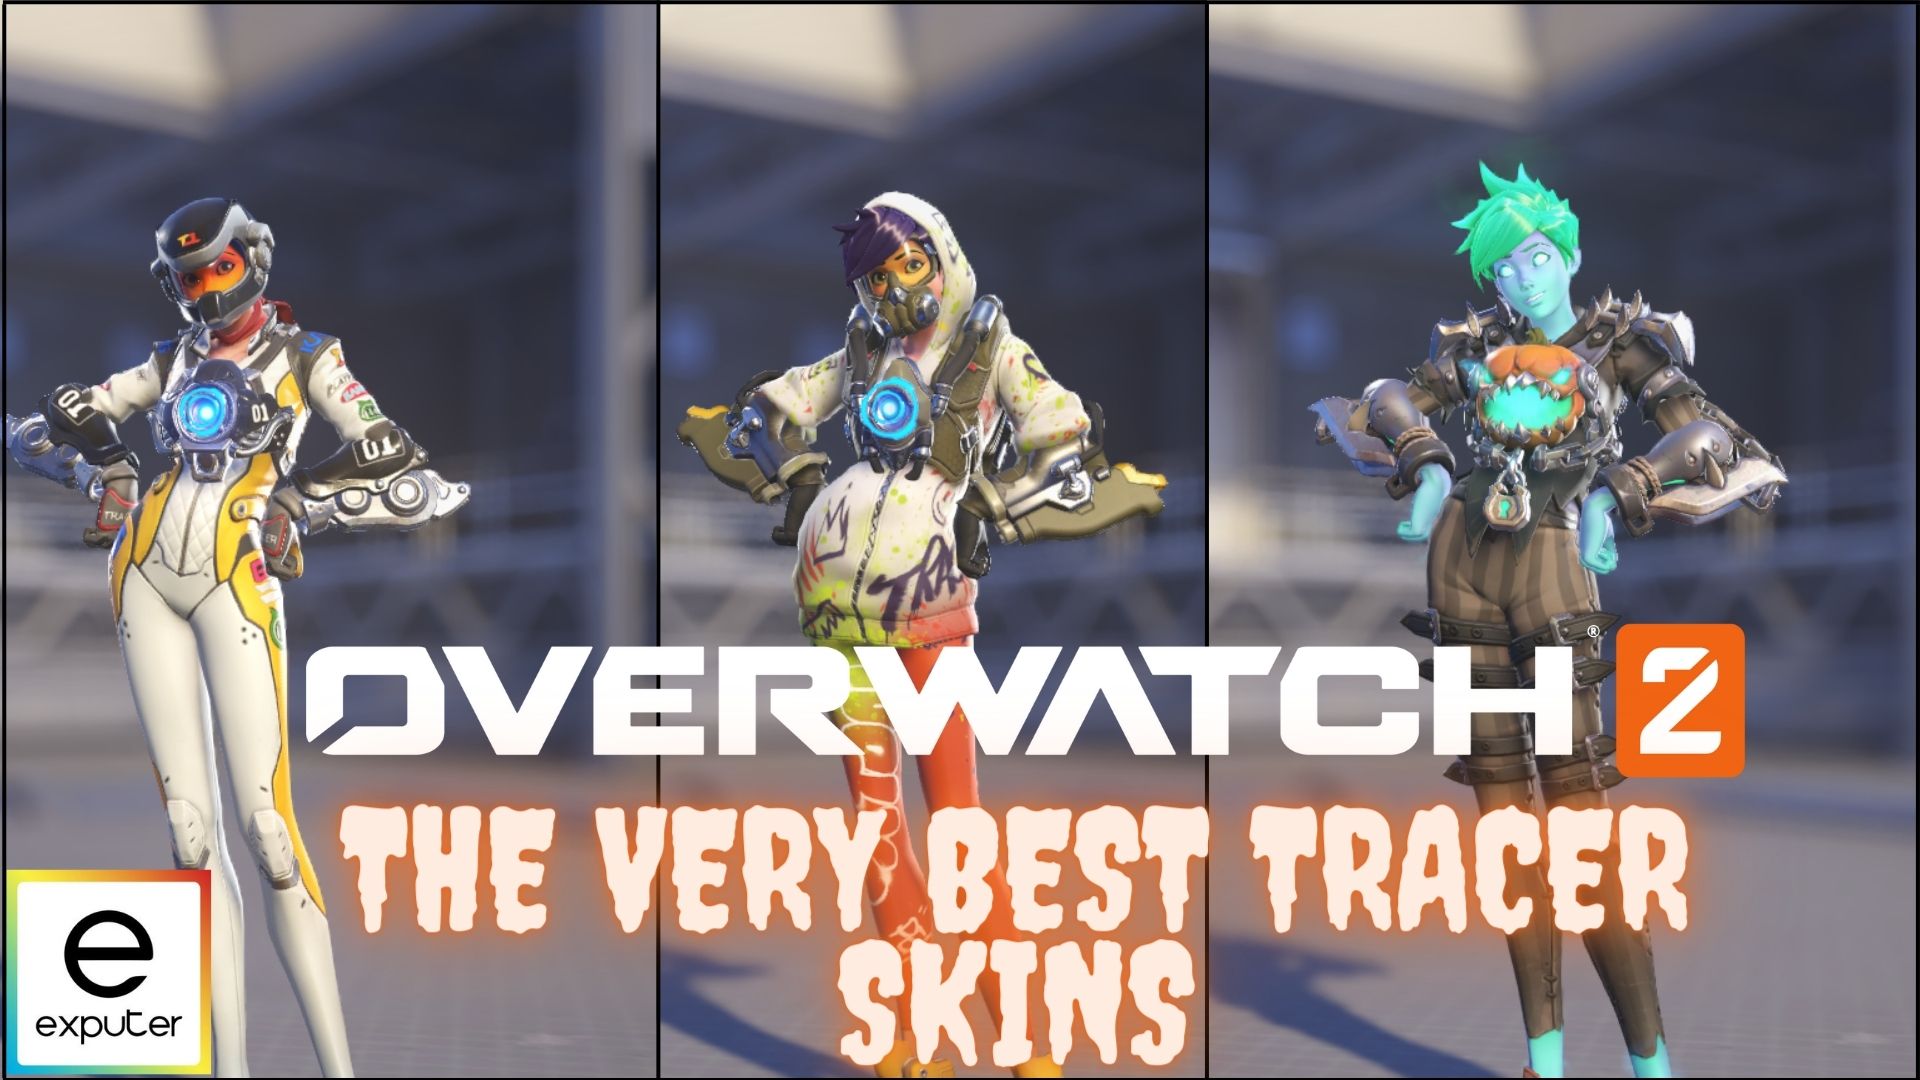 OW2 New Tracer - All emotes - 360°│Overwatch 2 Beta 